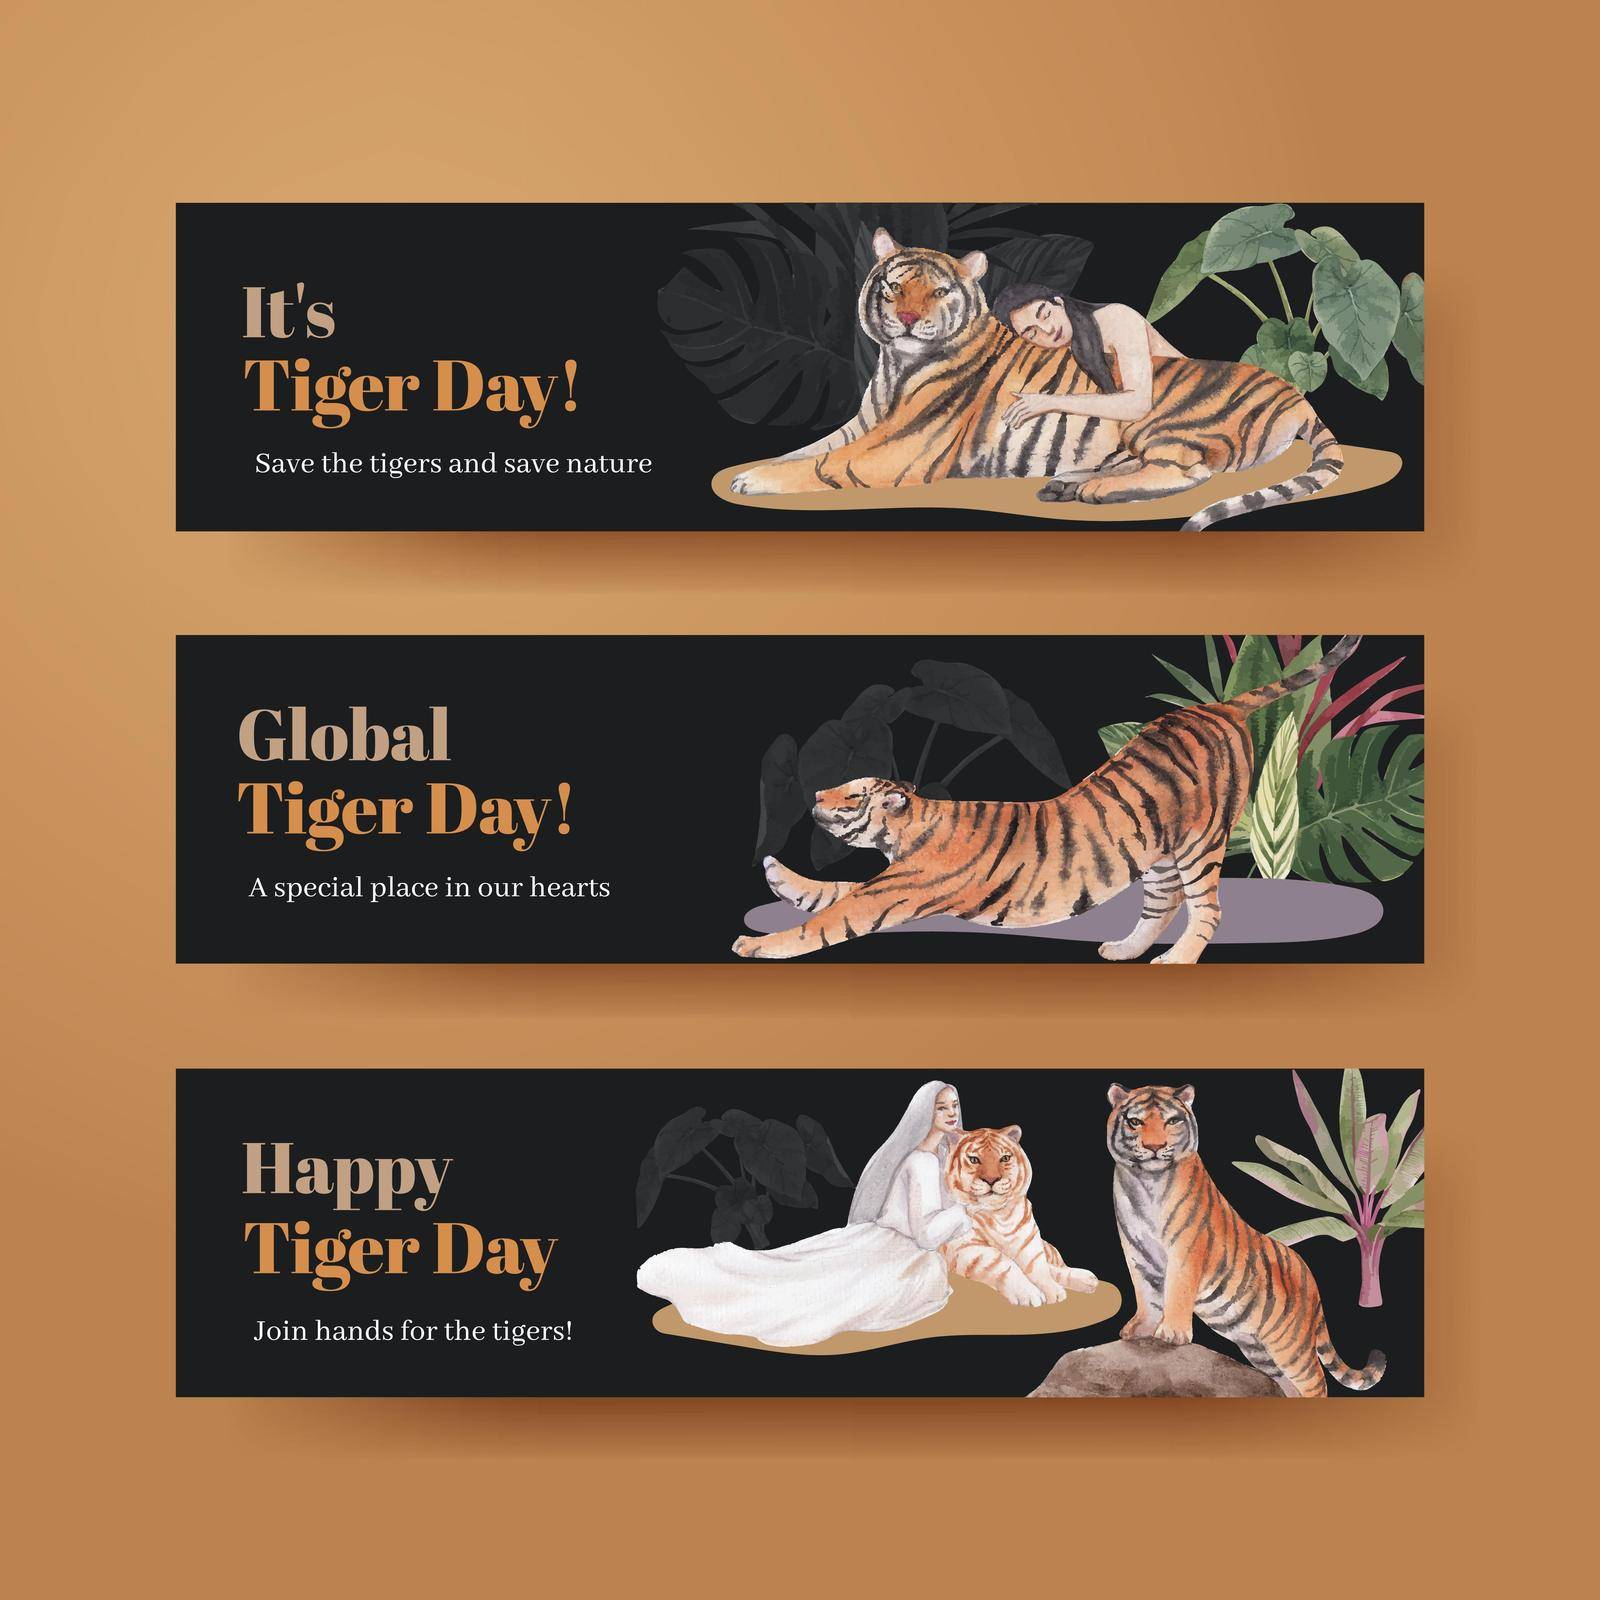 Banner template with international tiger day concept,watercolor style by Photographeeasia